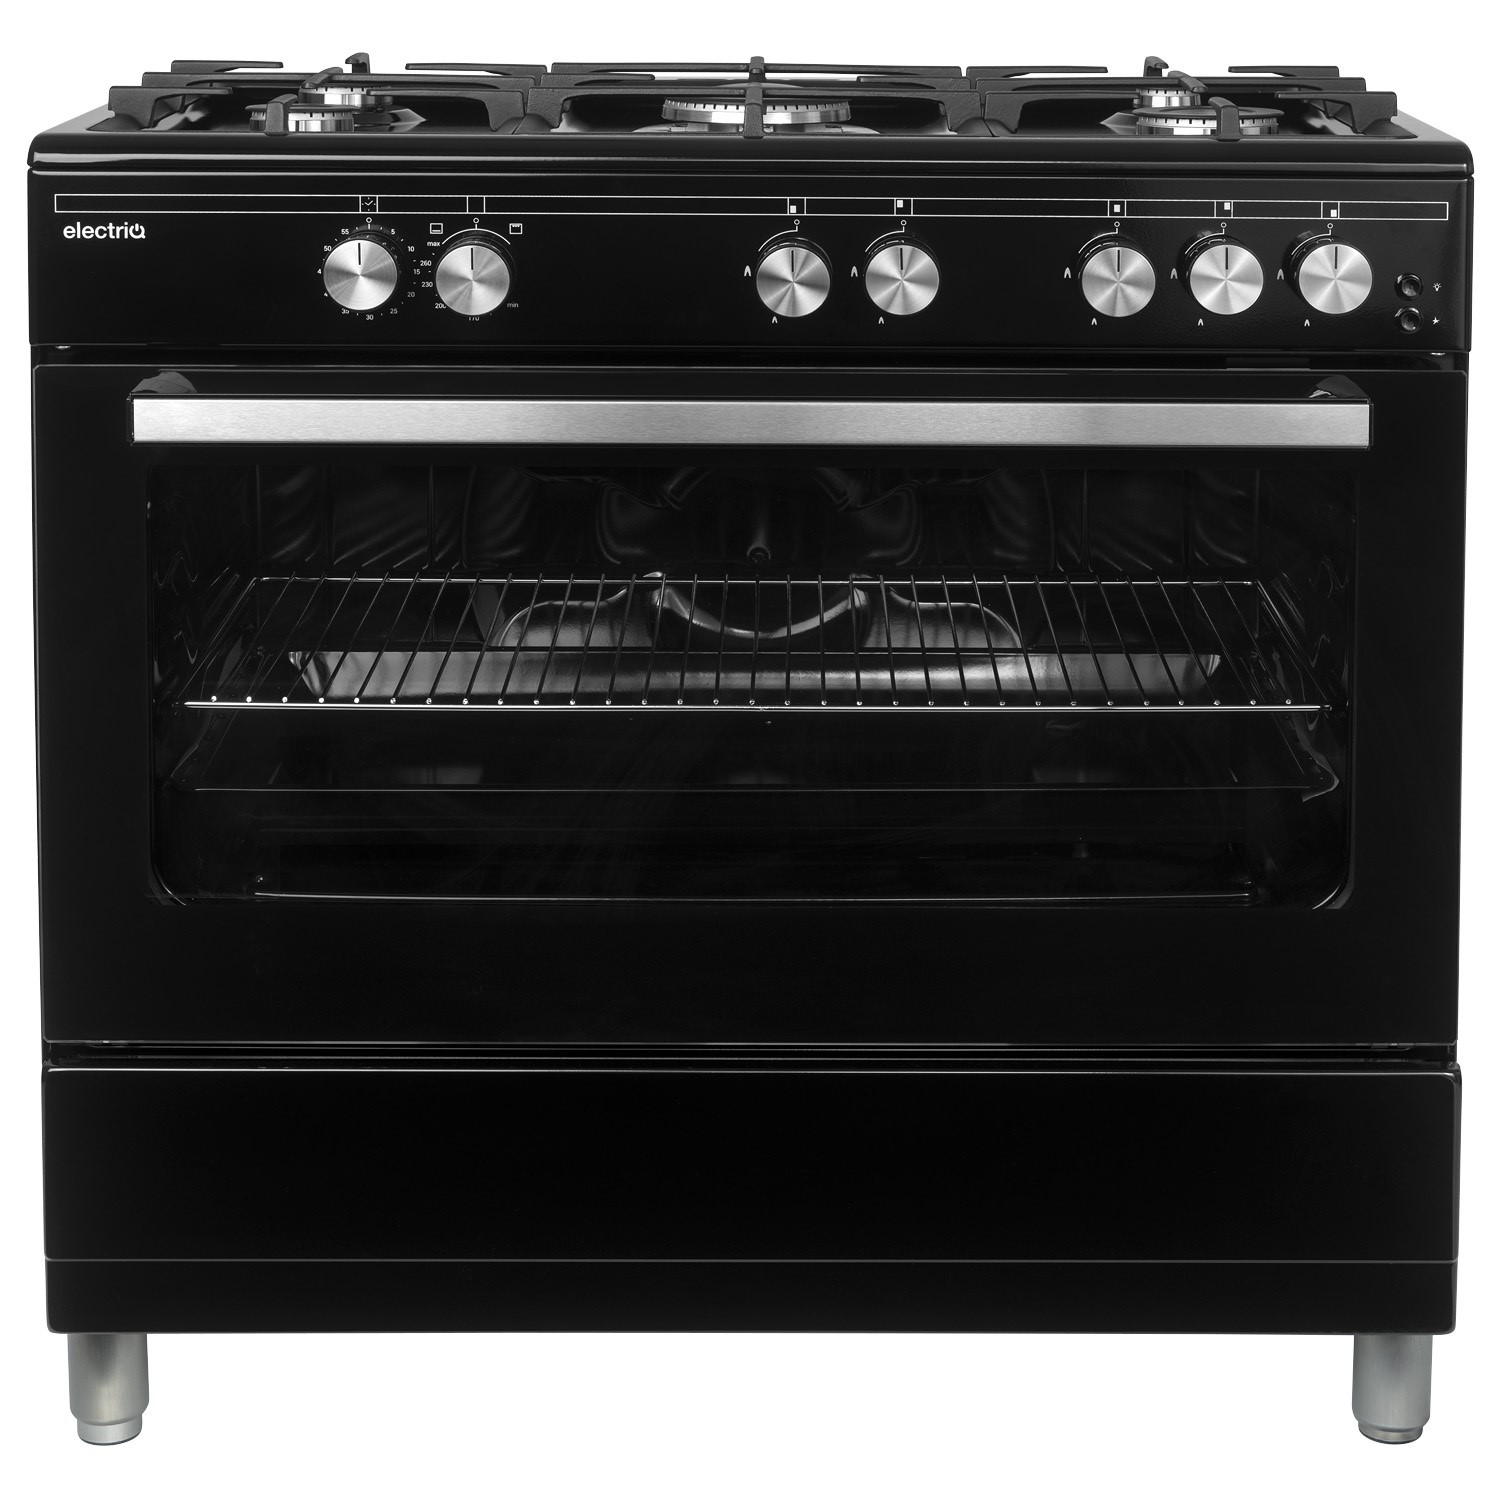 Extra large gas oven